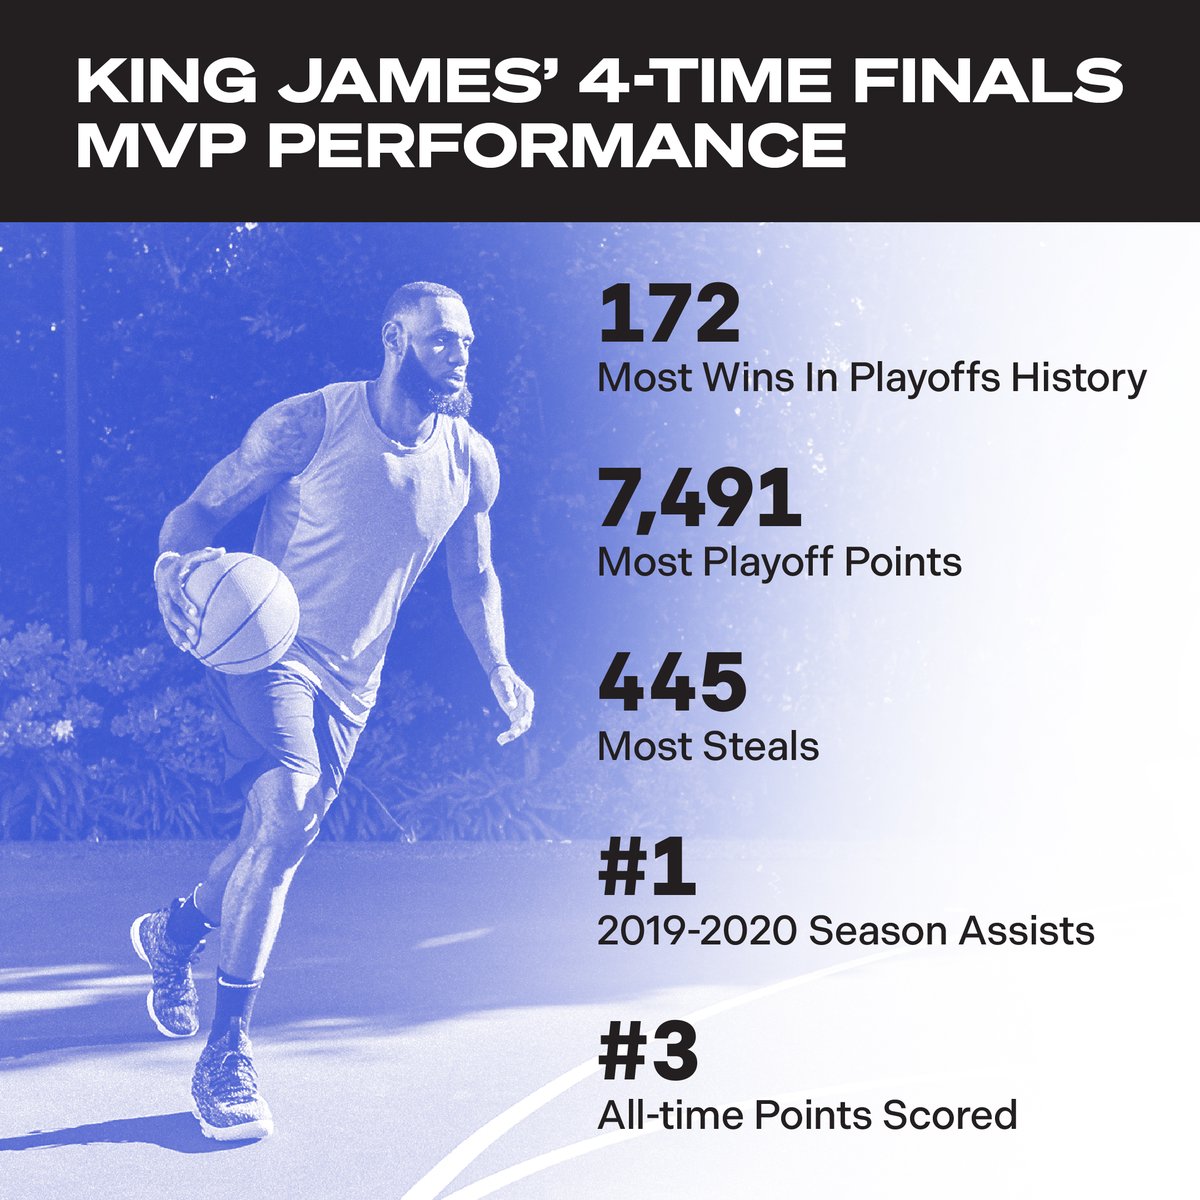 Congrats to our record-breaking champ, @KingJames and the @Lakers on their historic win and unbelievable season. 🏆 To celebrate the 🐐, take 23% off sitewide until 10.23 using code LEBRON23 at checkout. ladder.sport